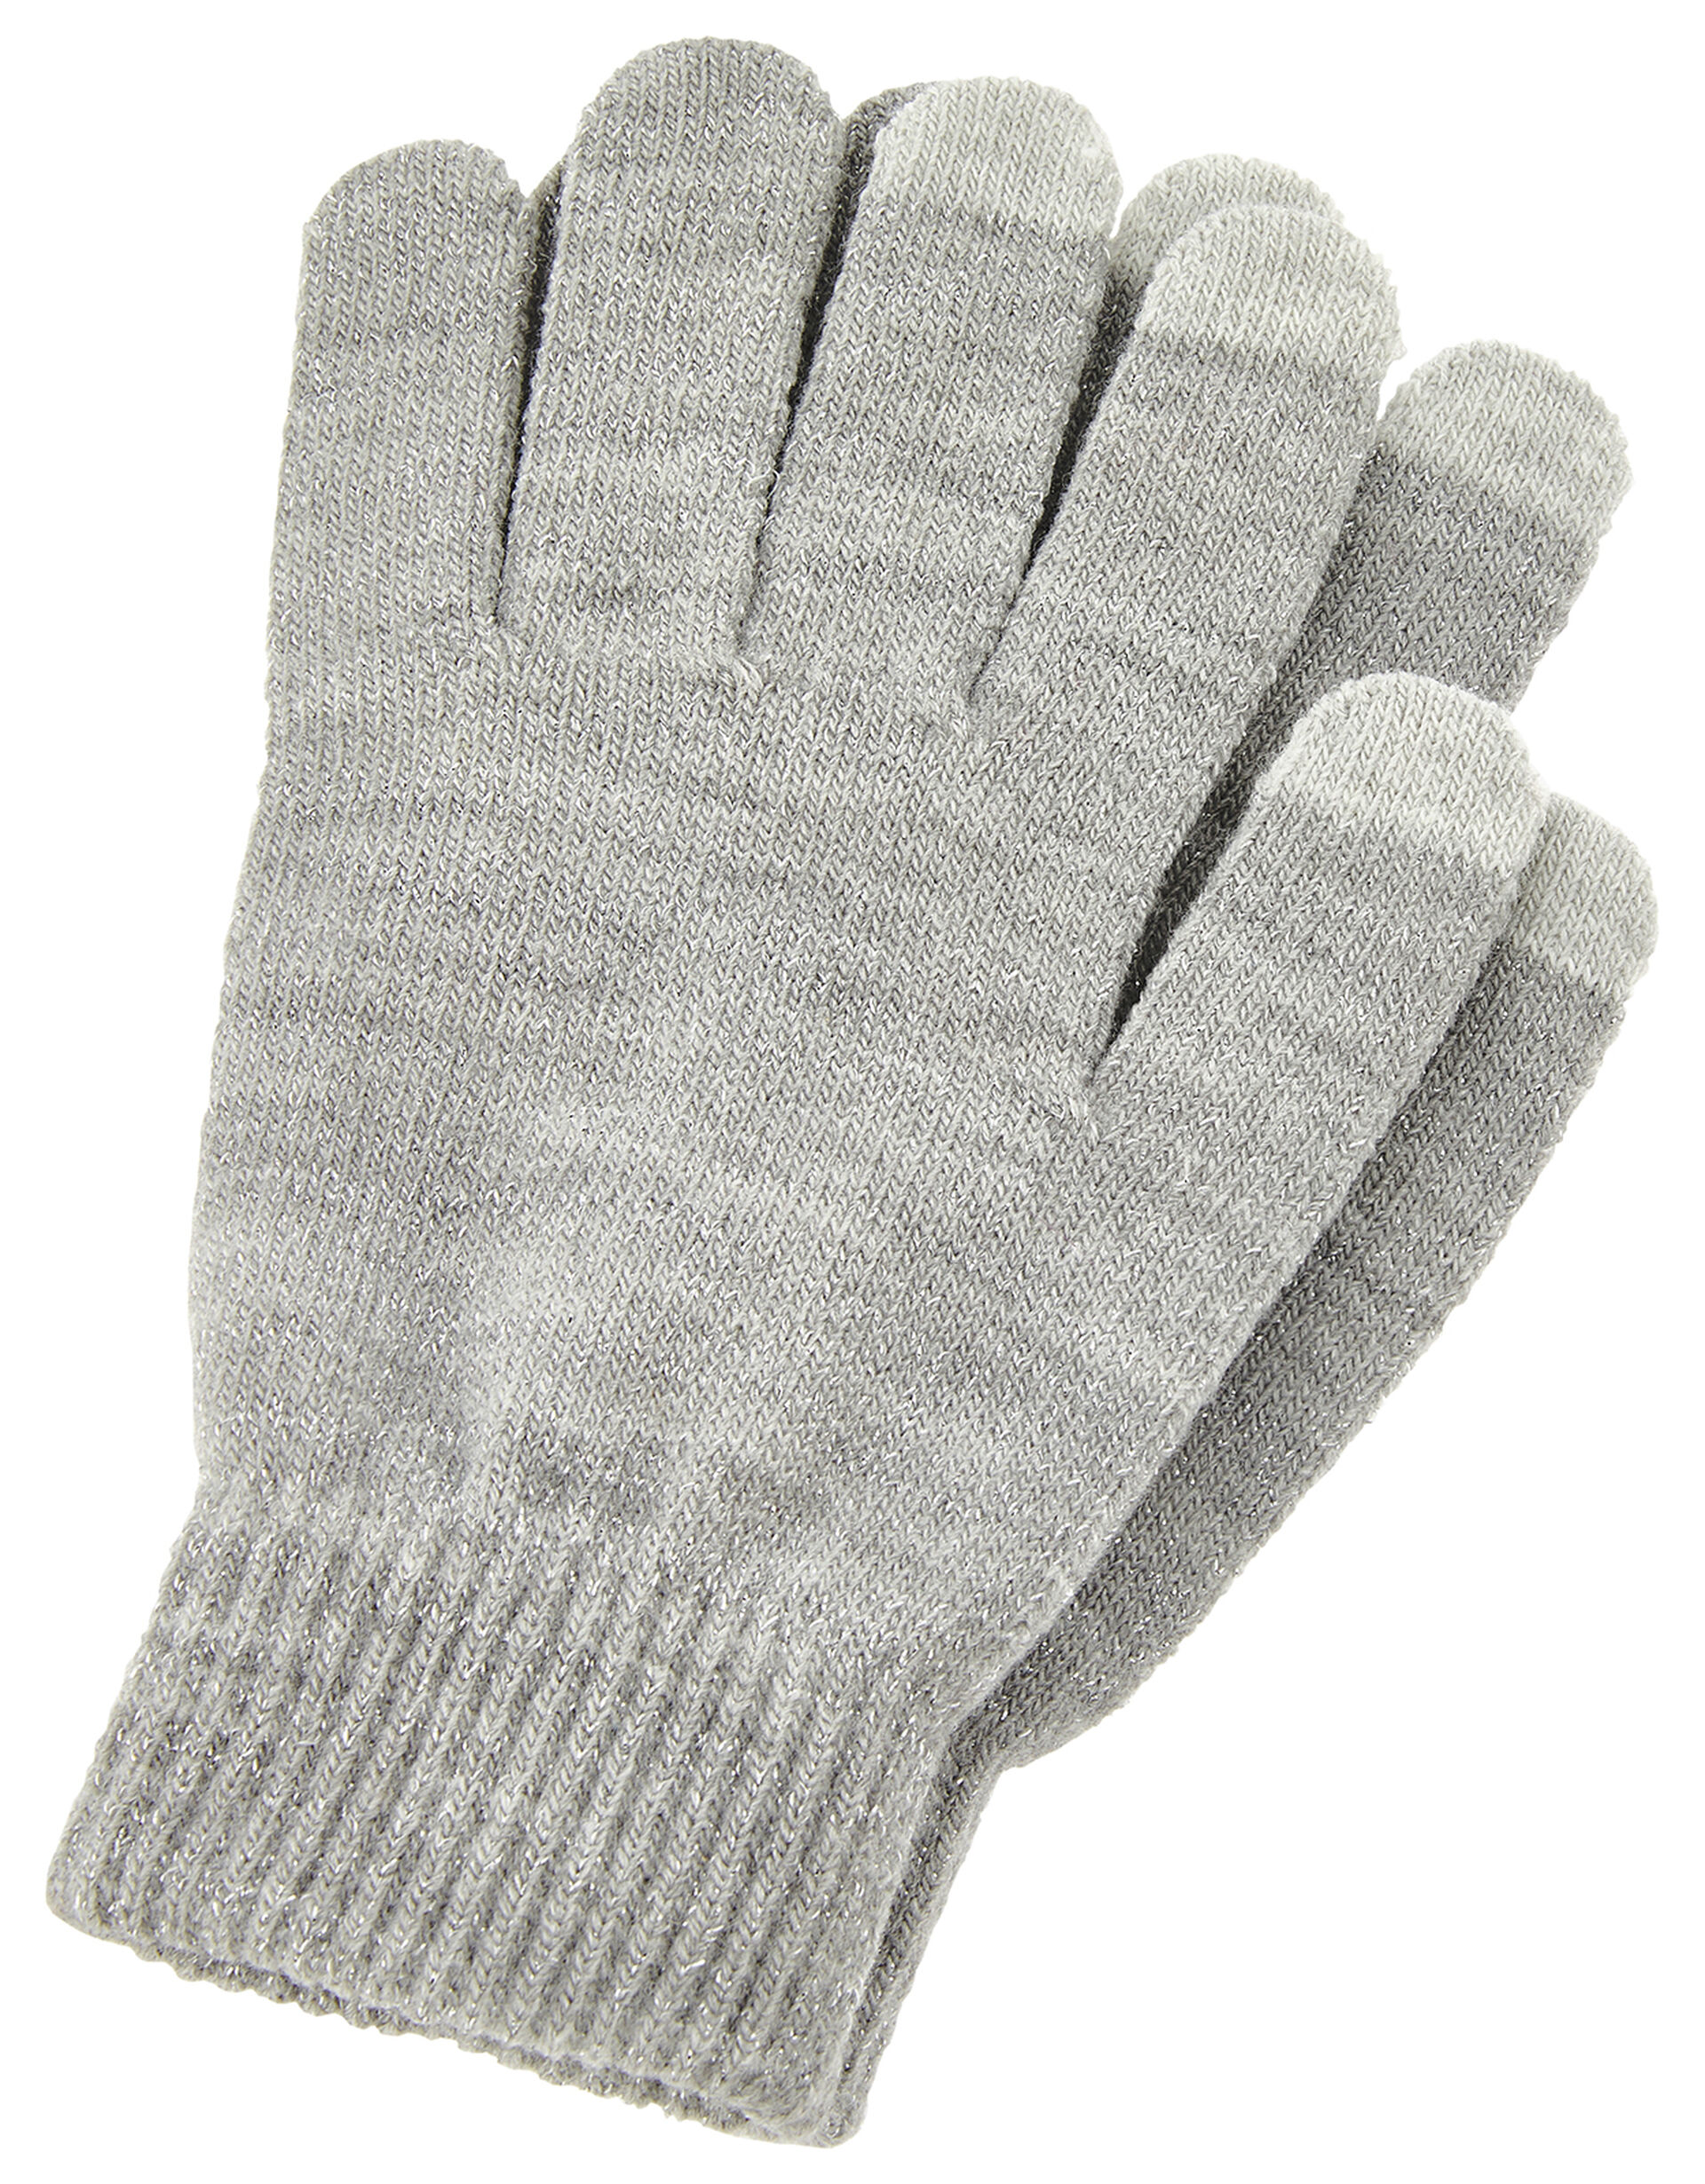 Shimmer Knit Touchscreen Gloves, , large